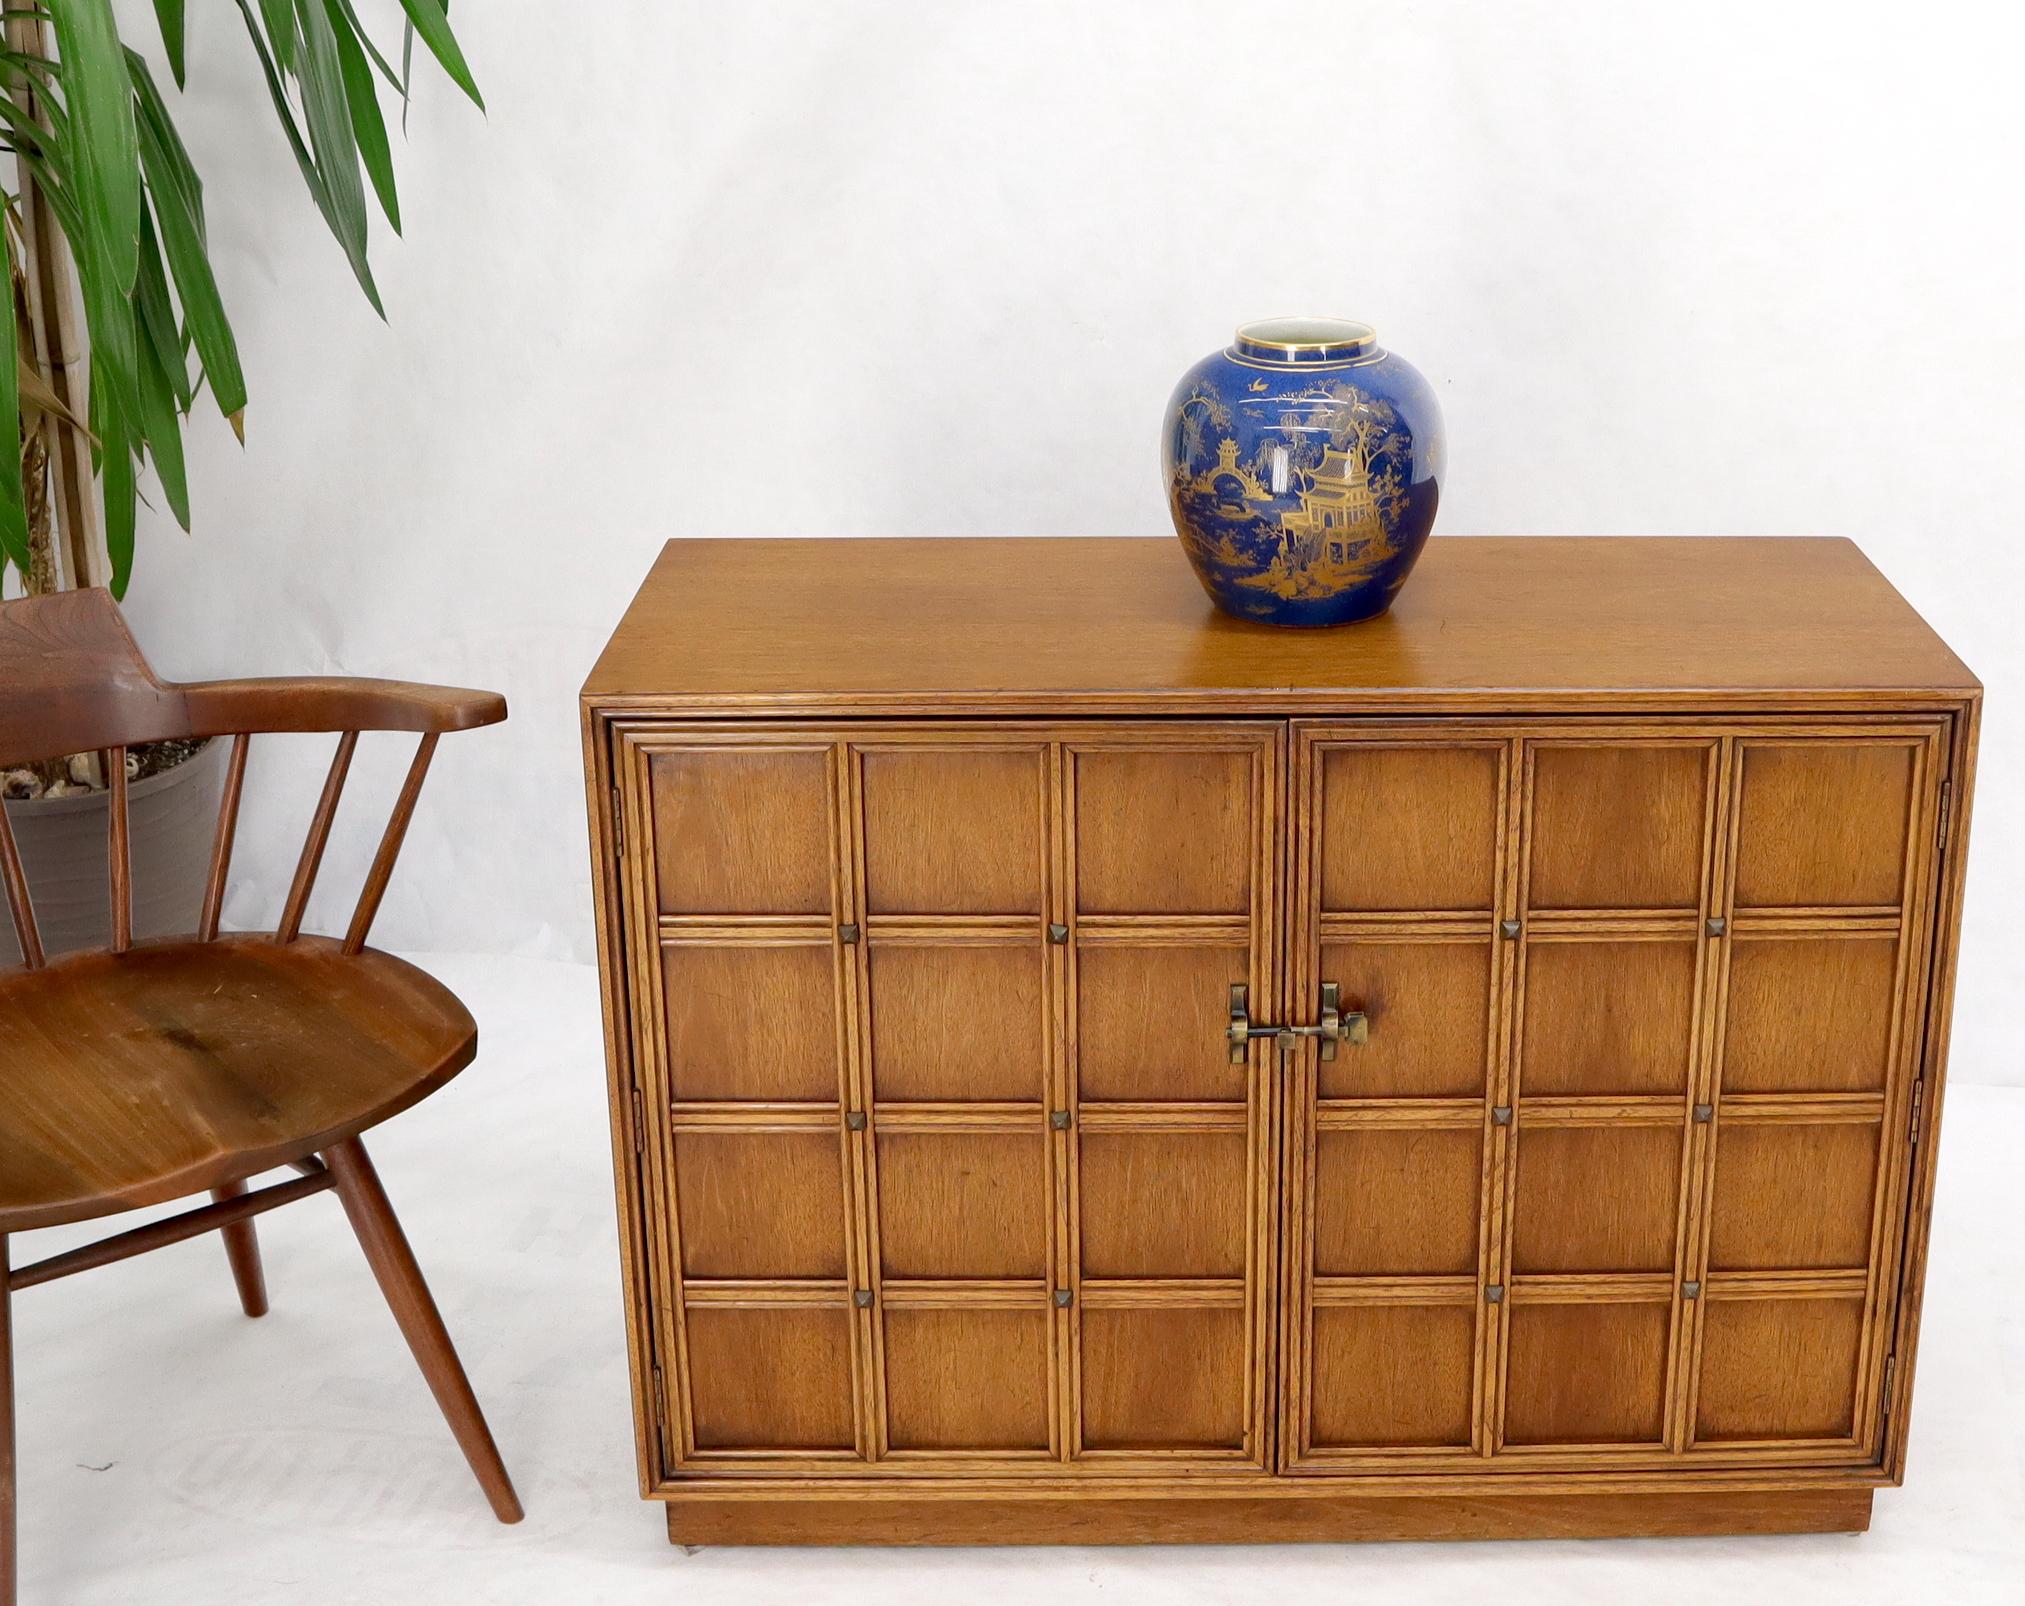 20th Century Double Door Buckle Latch Lattice and Brass Studs Front Credenza Console Cabinet